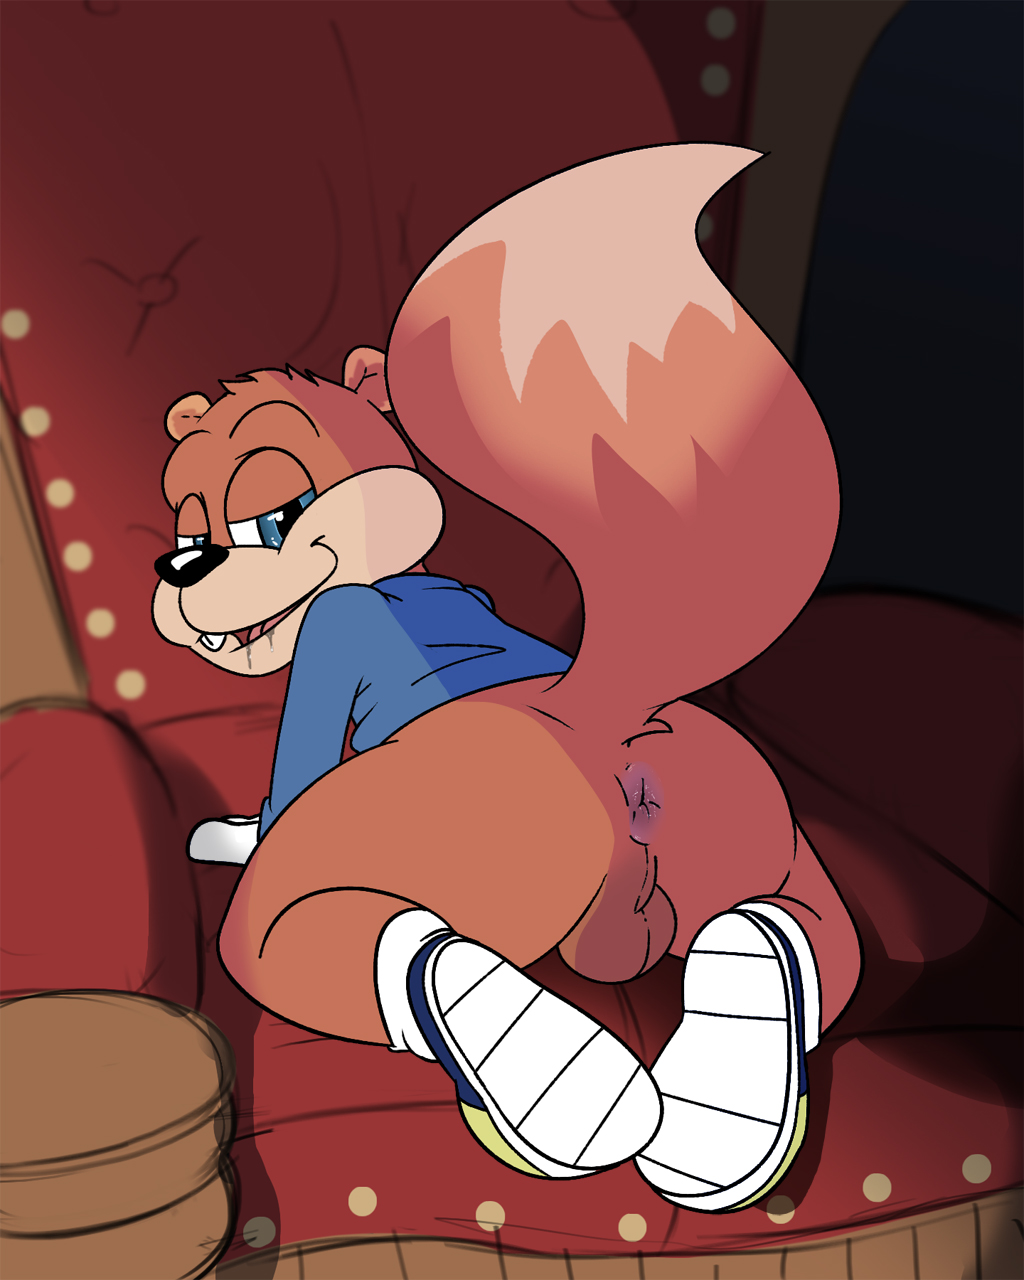 conker's day fur tediz bad Would you love a pervert as long as she's cute?